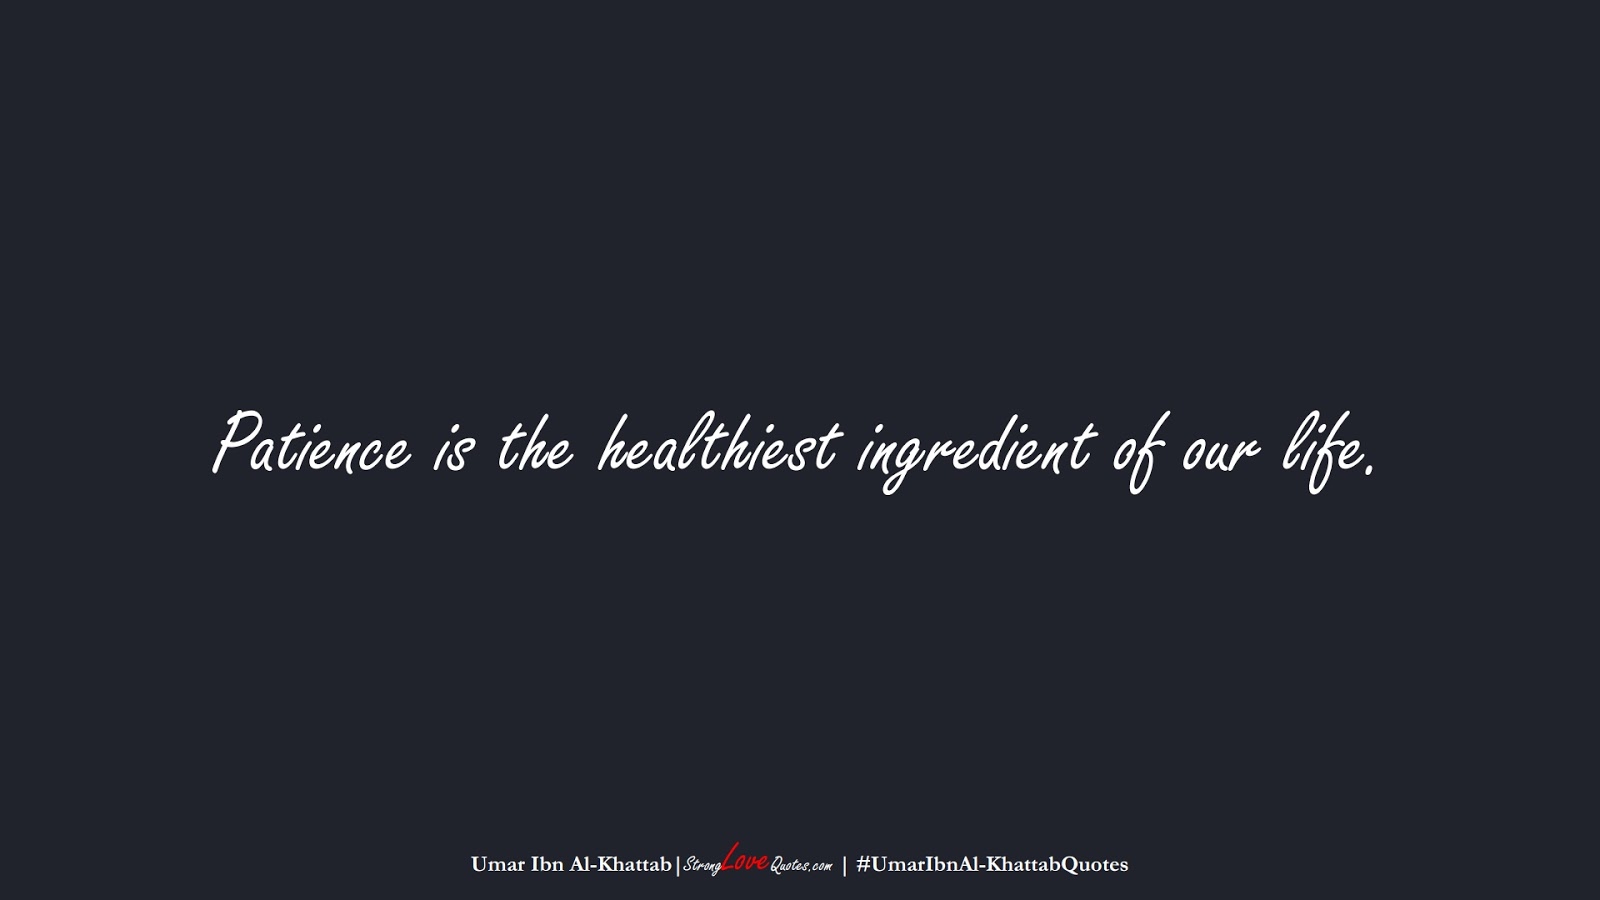 Patience is the healthiest ingredient of our life. (Umar Ibn Al-Khattab);  #UmarIbnAl-KhattabQuotes